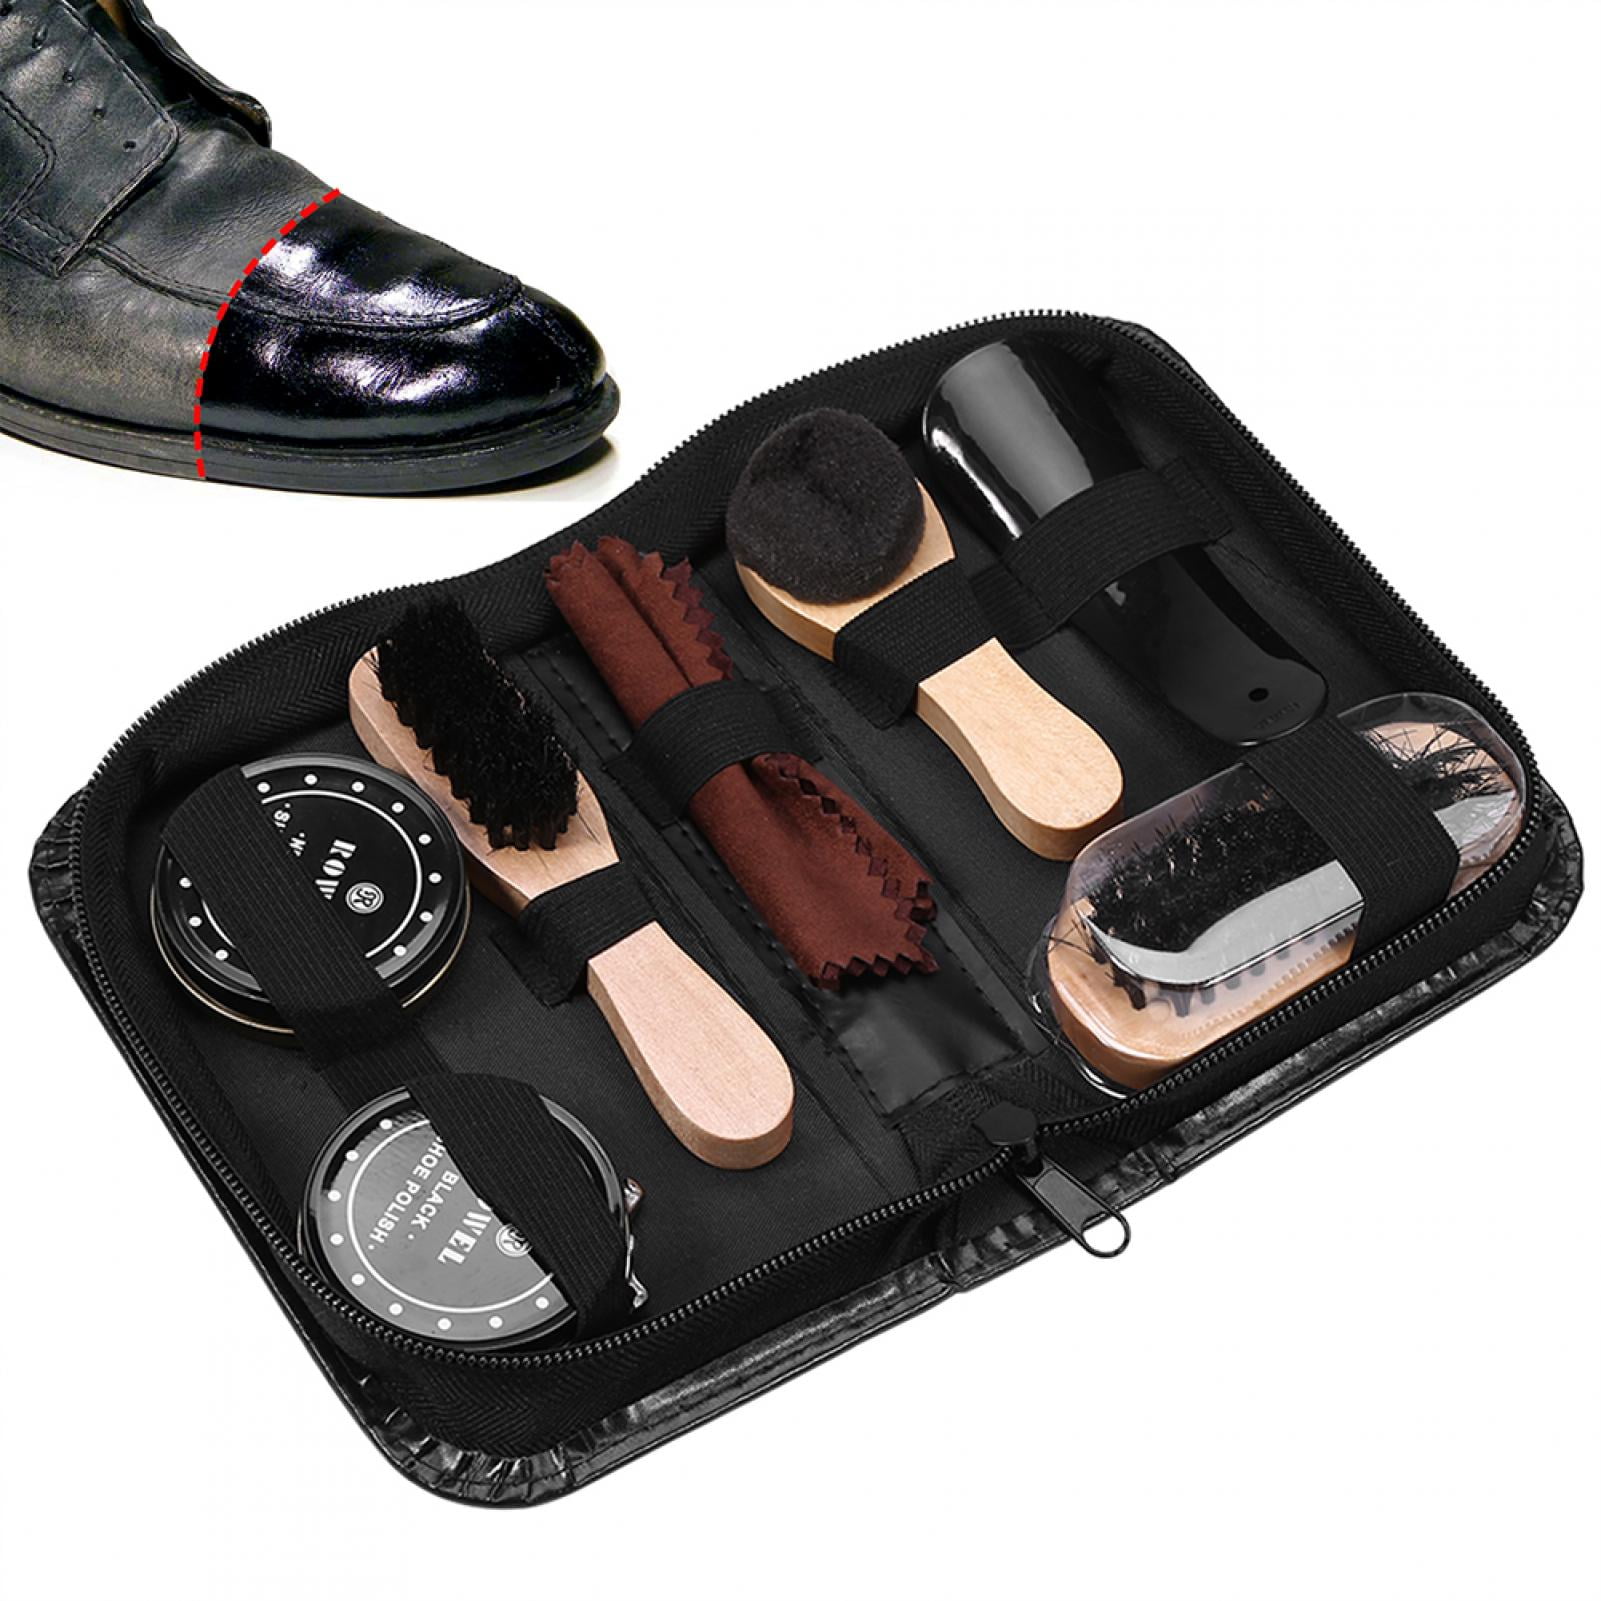 Buy An Wholesale oem shoe cleaner For Shoe Polishing And